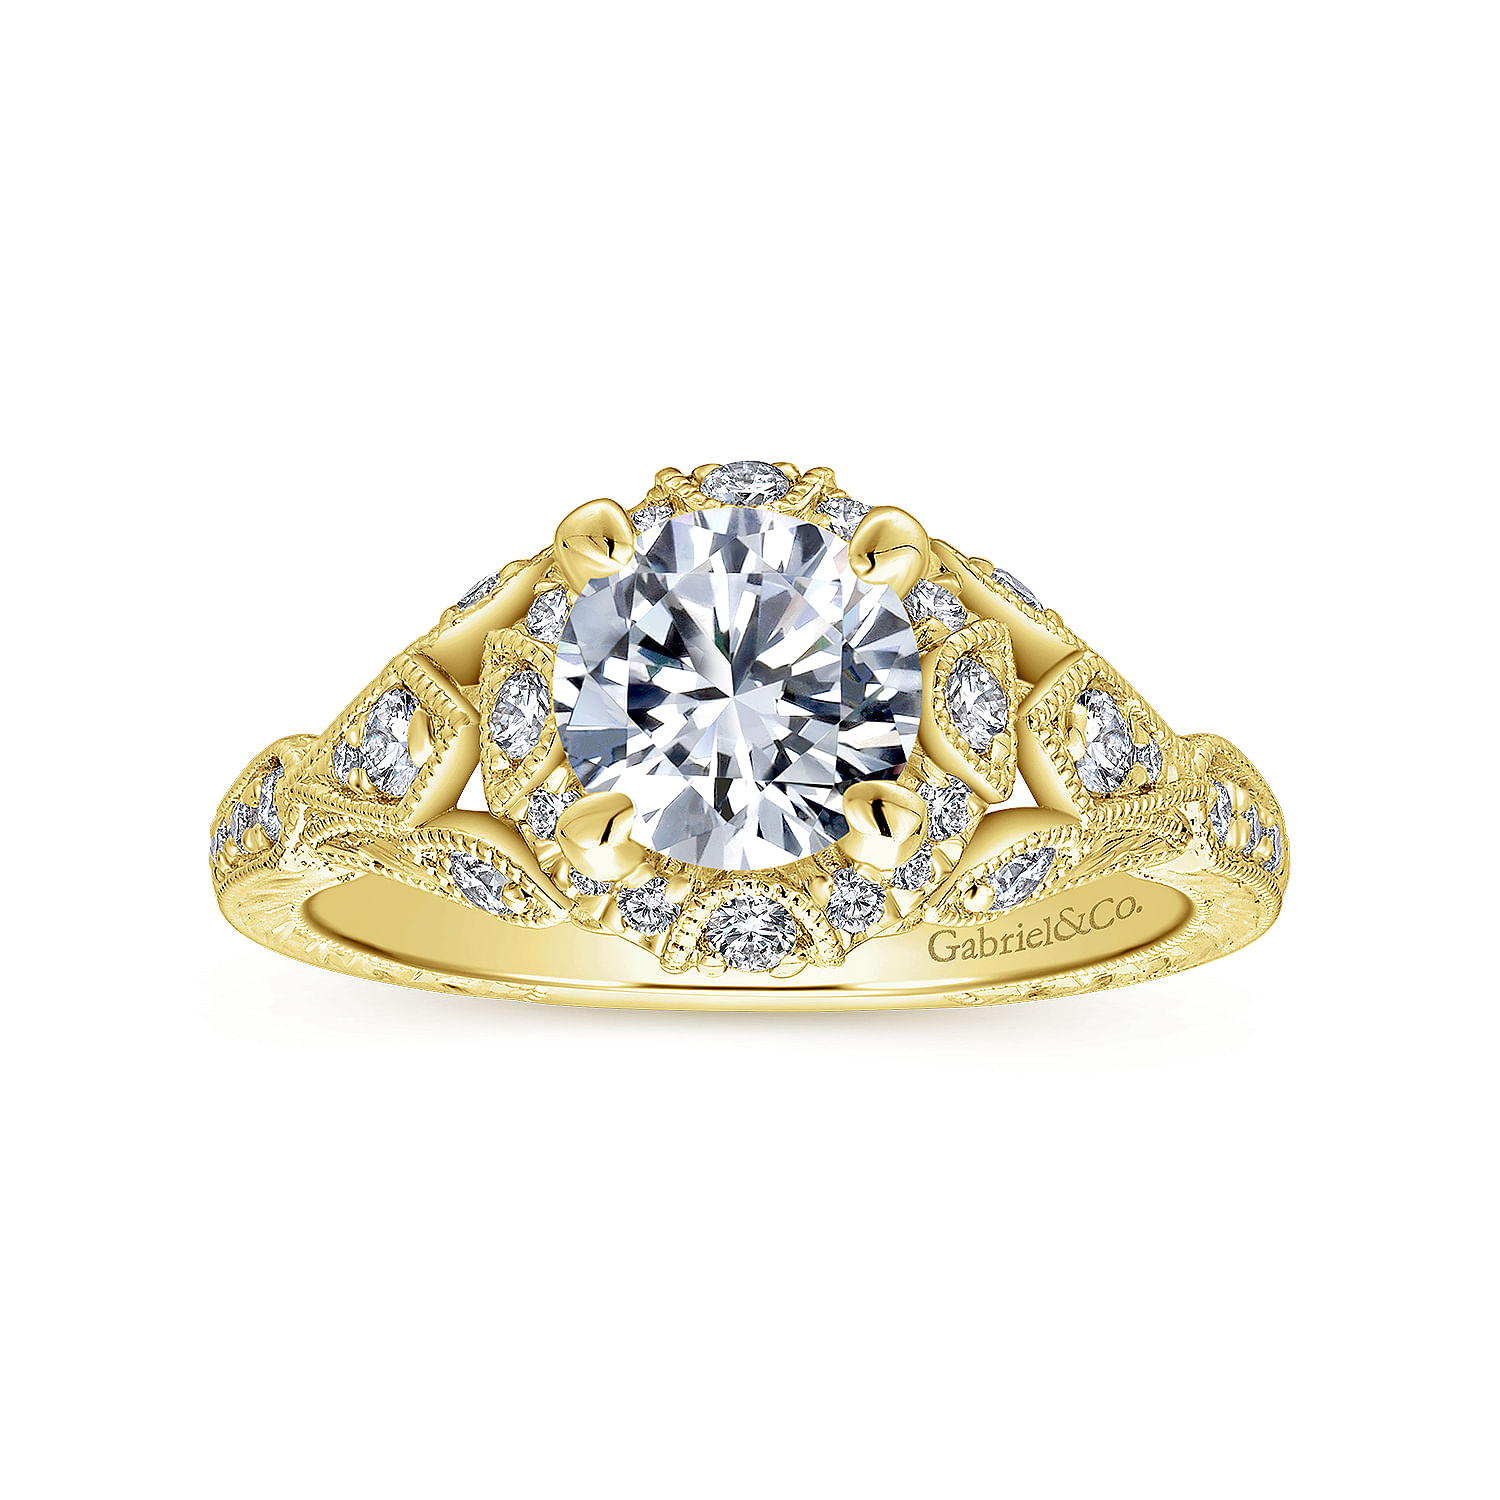 Unique 14K Yellow Gold Vintage Inspired Diamond Halo Engagement Ring